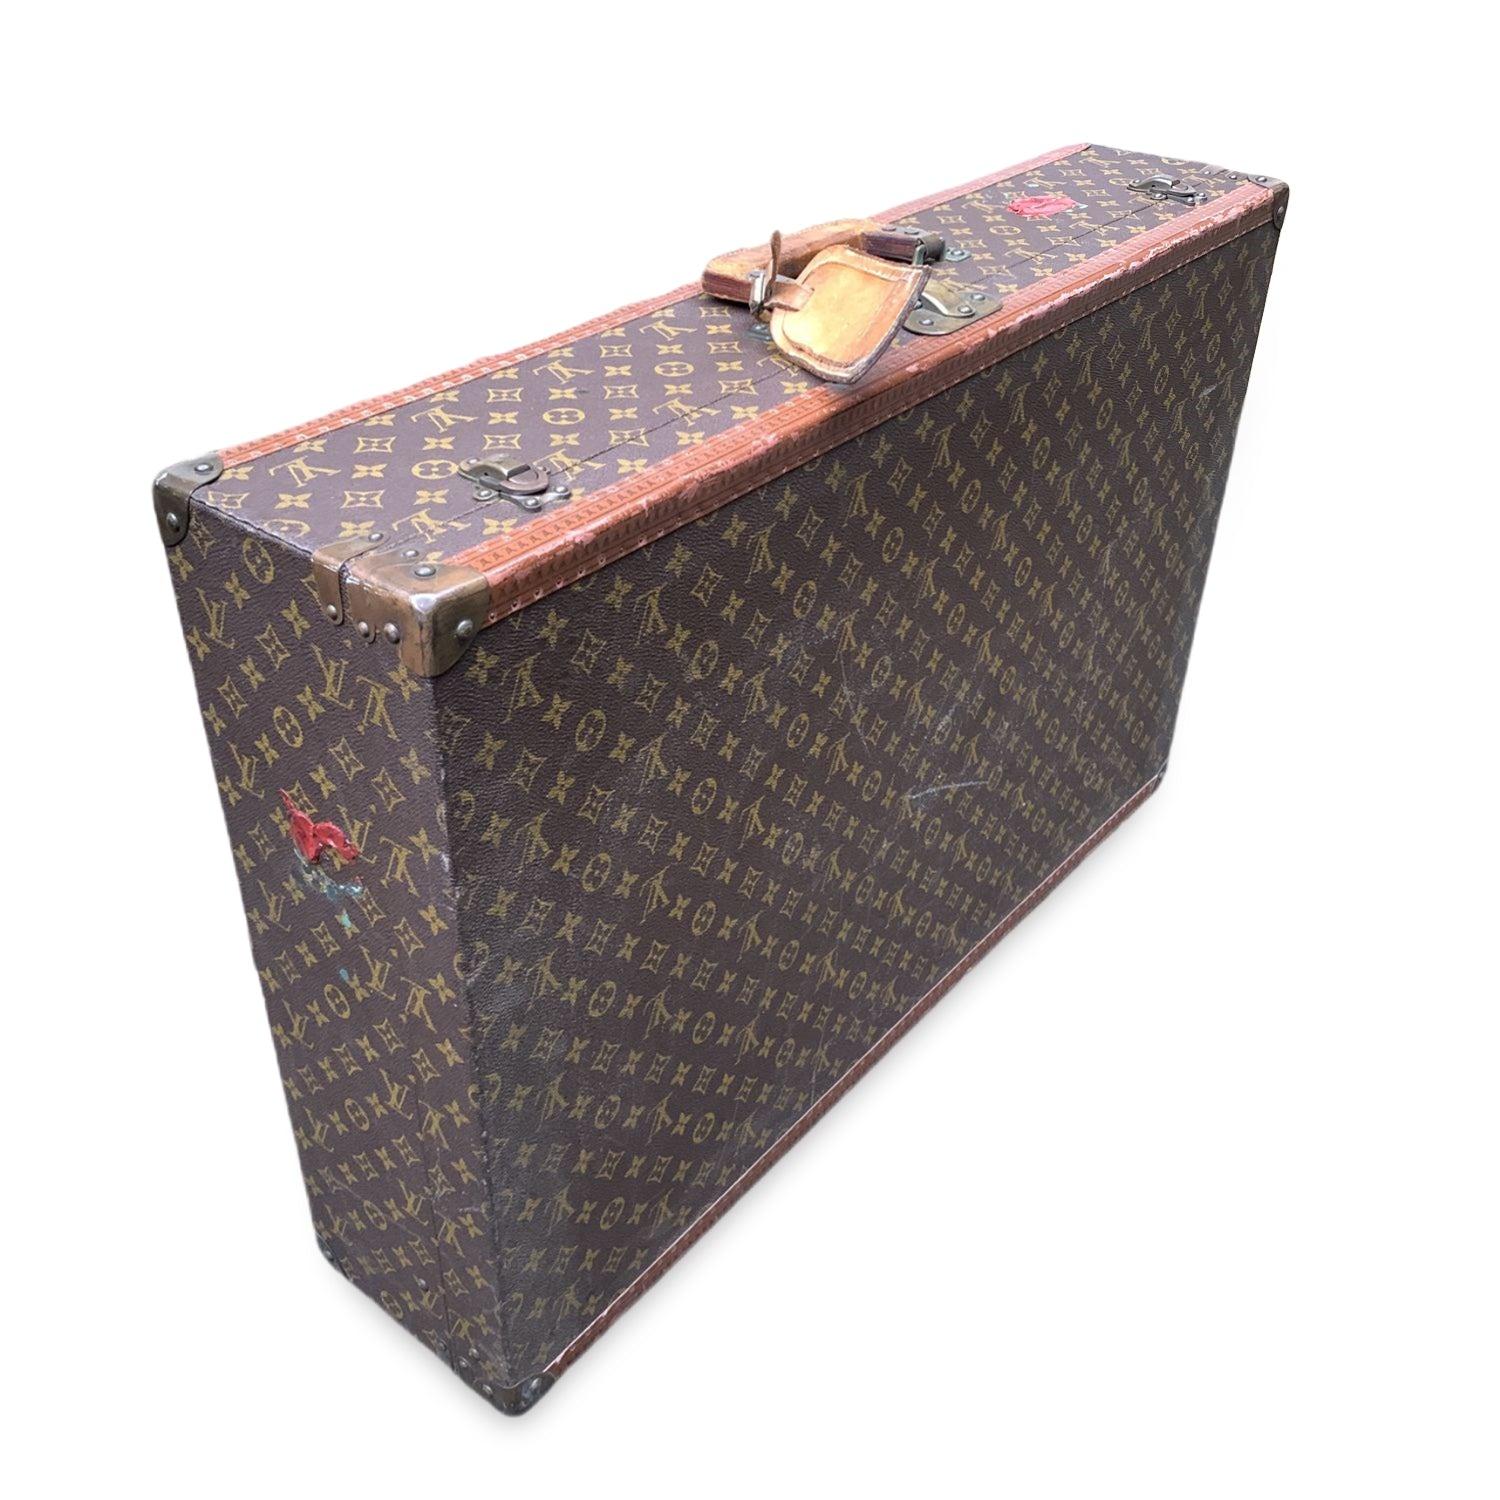 This beautiful Bag will come with a Certificate of Authenticity provided by Entrupy. The certificate will be provided at no further cost LOUIS VUITTON vintage Monogram Braken 80 Suitcase. This is a limited edition from the 70's. The peculiarity of